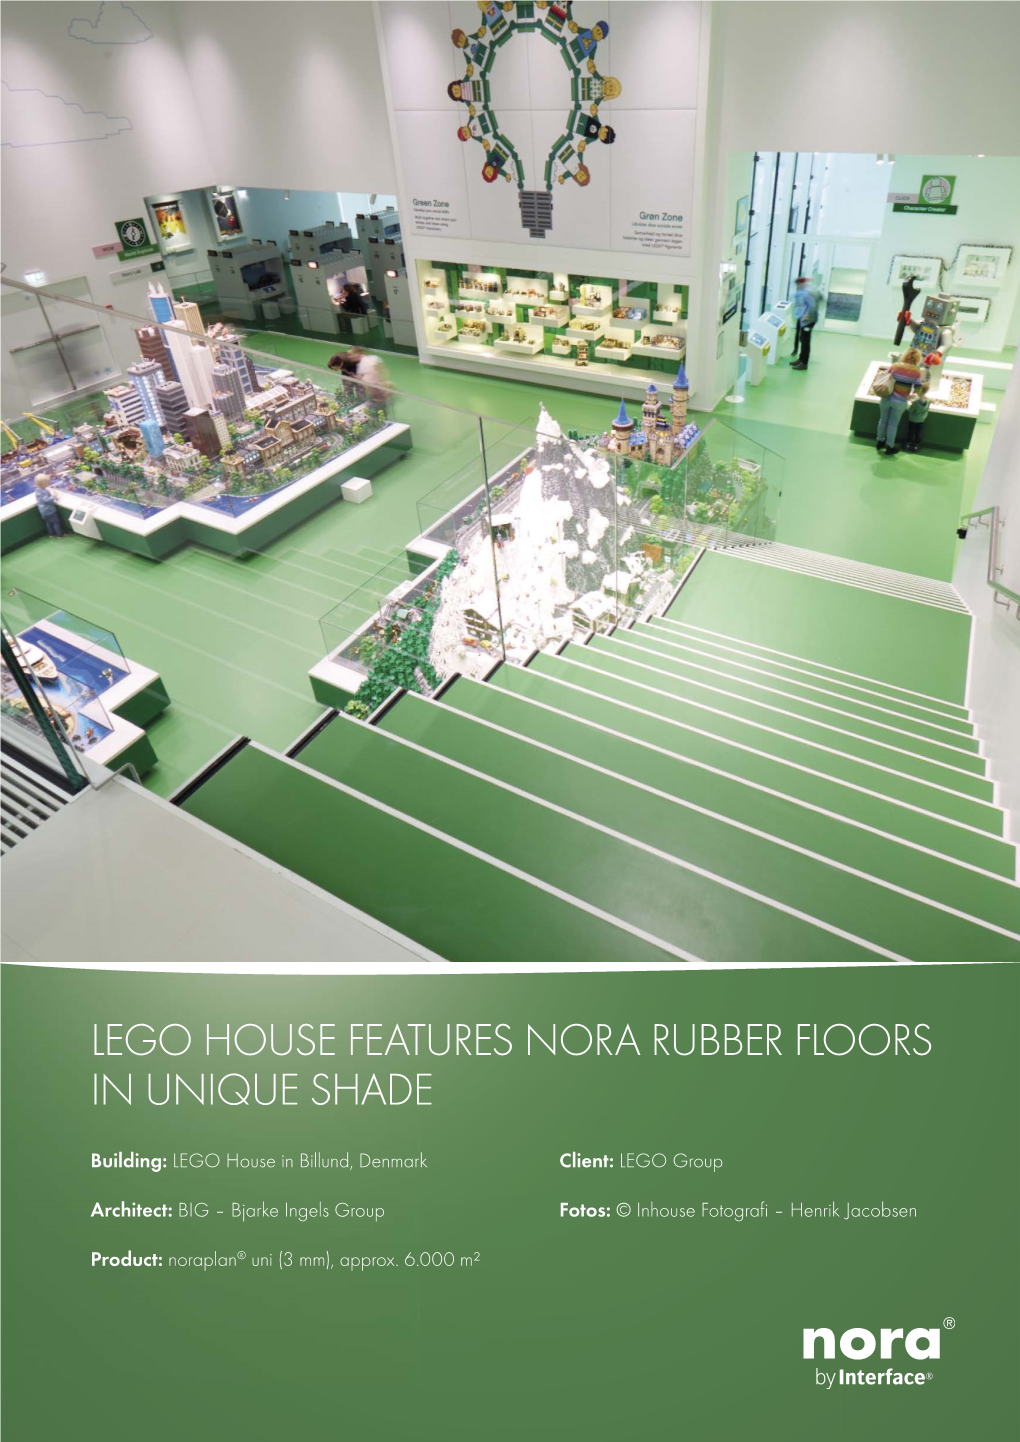 Lego House Features Nora Rubber Floors in Unique Shade